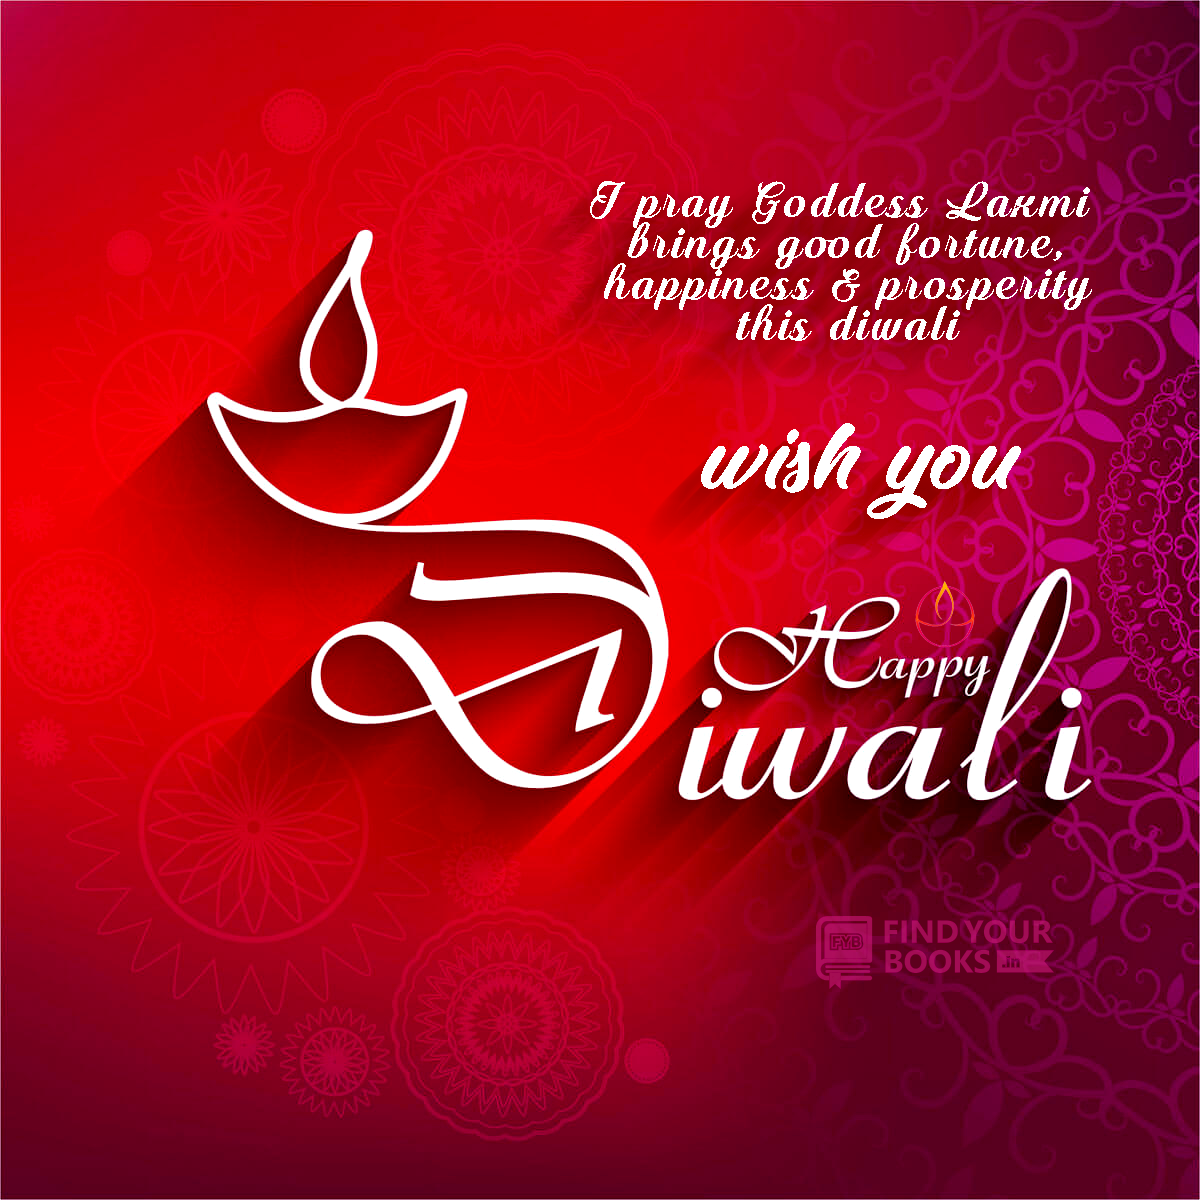 happy diwali images wallpapers